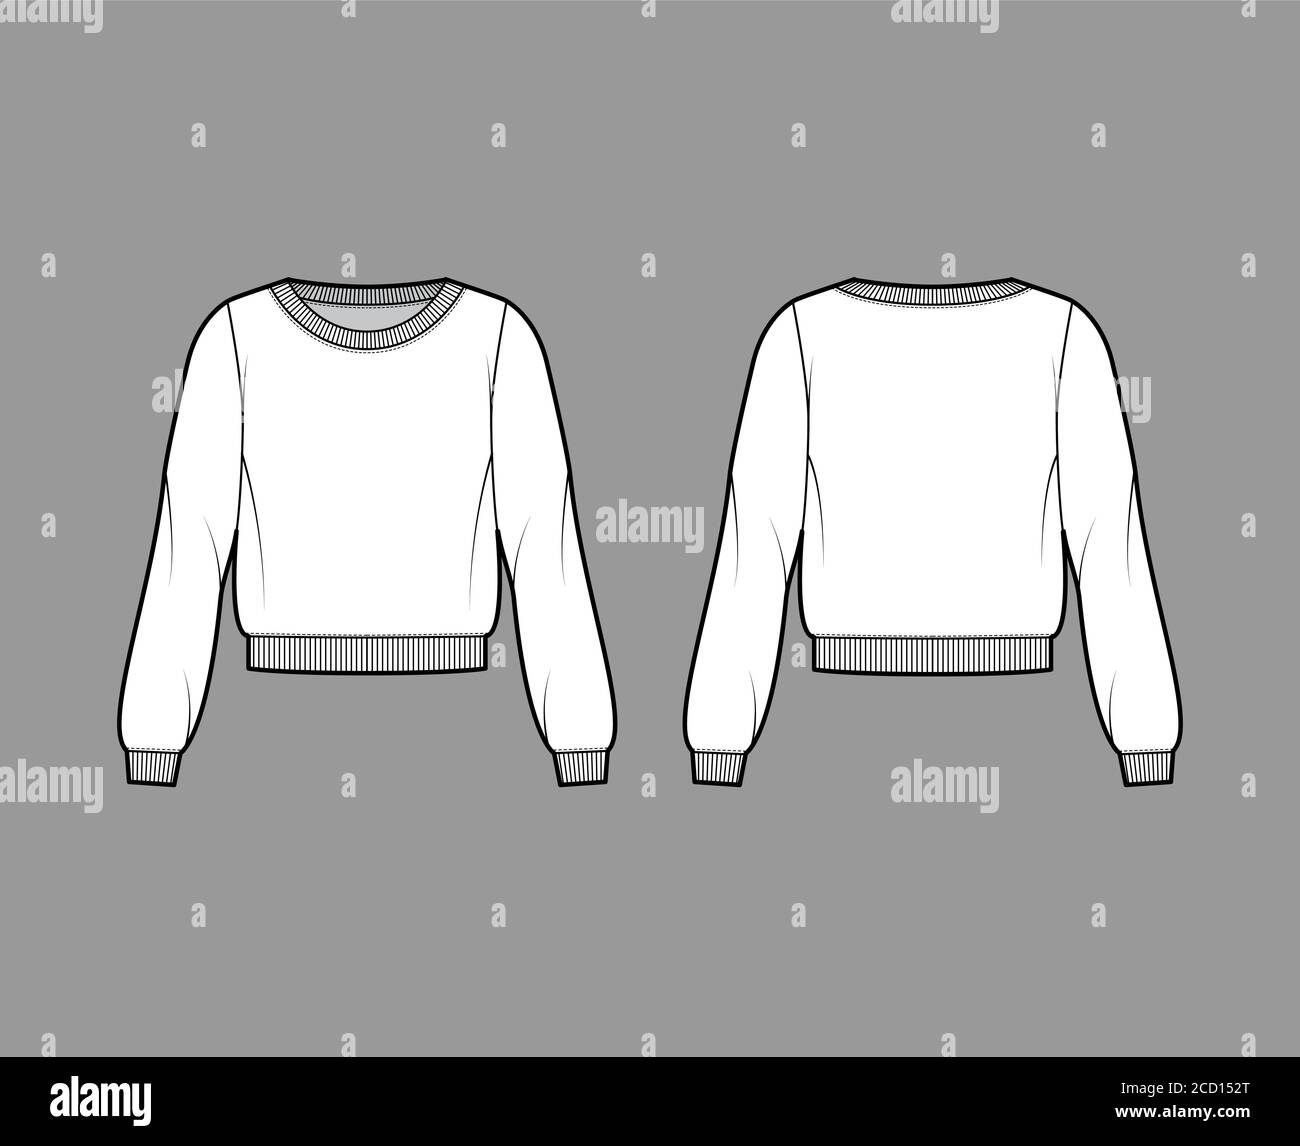 Cotton-terry sweatshirt technical fashion illustration with relaxed fit, scoop neckline, long sleeves, ribbed trims. Flat outwear jumper apparel template front back white color. Women, men unisex top Stock Vector